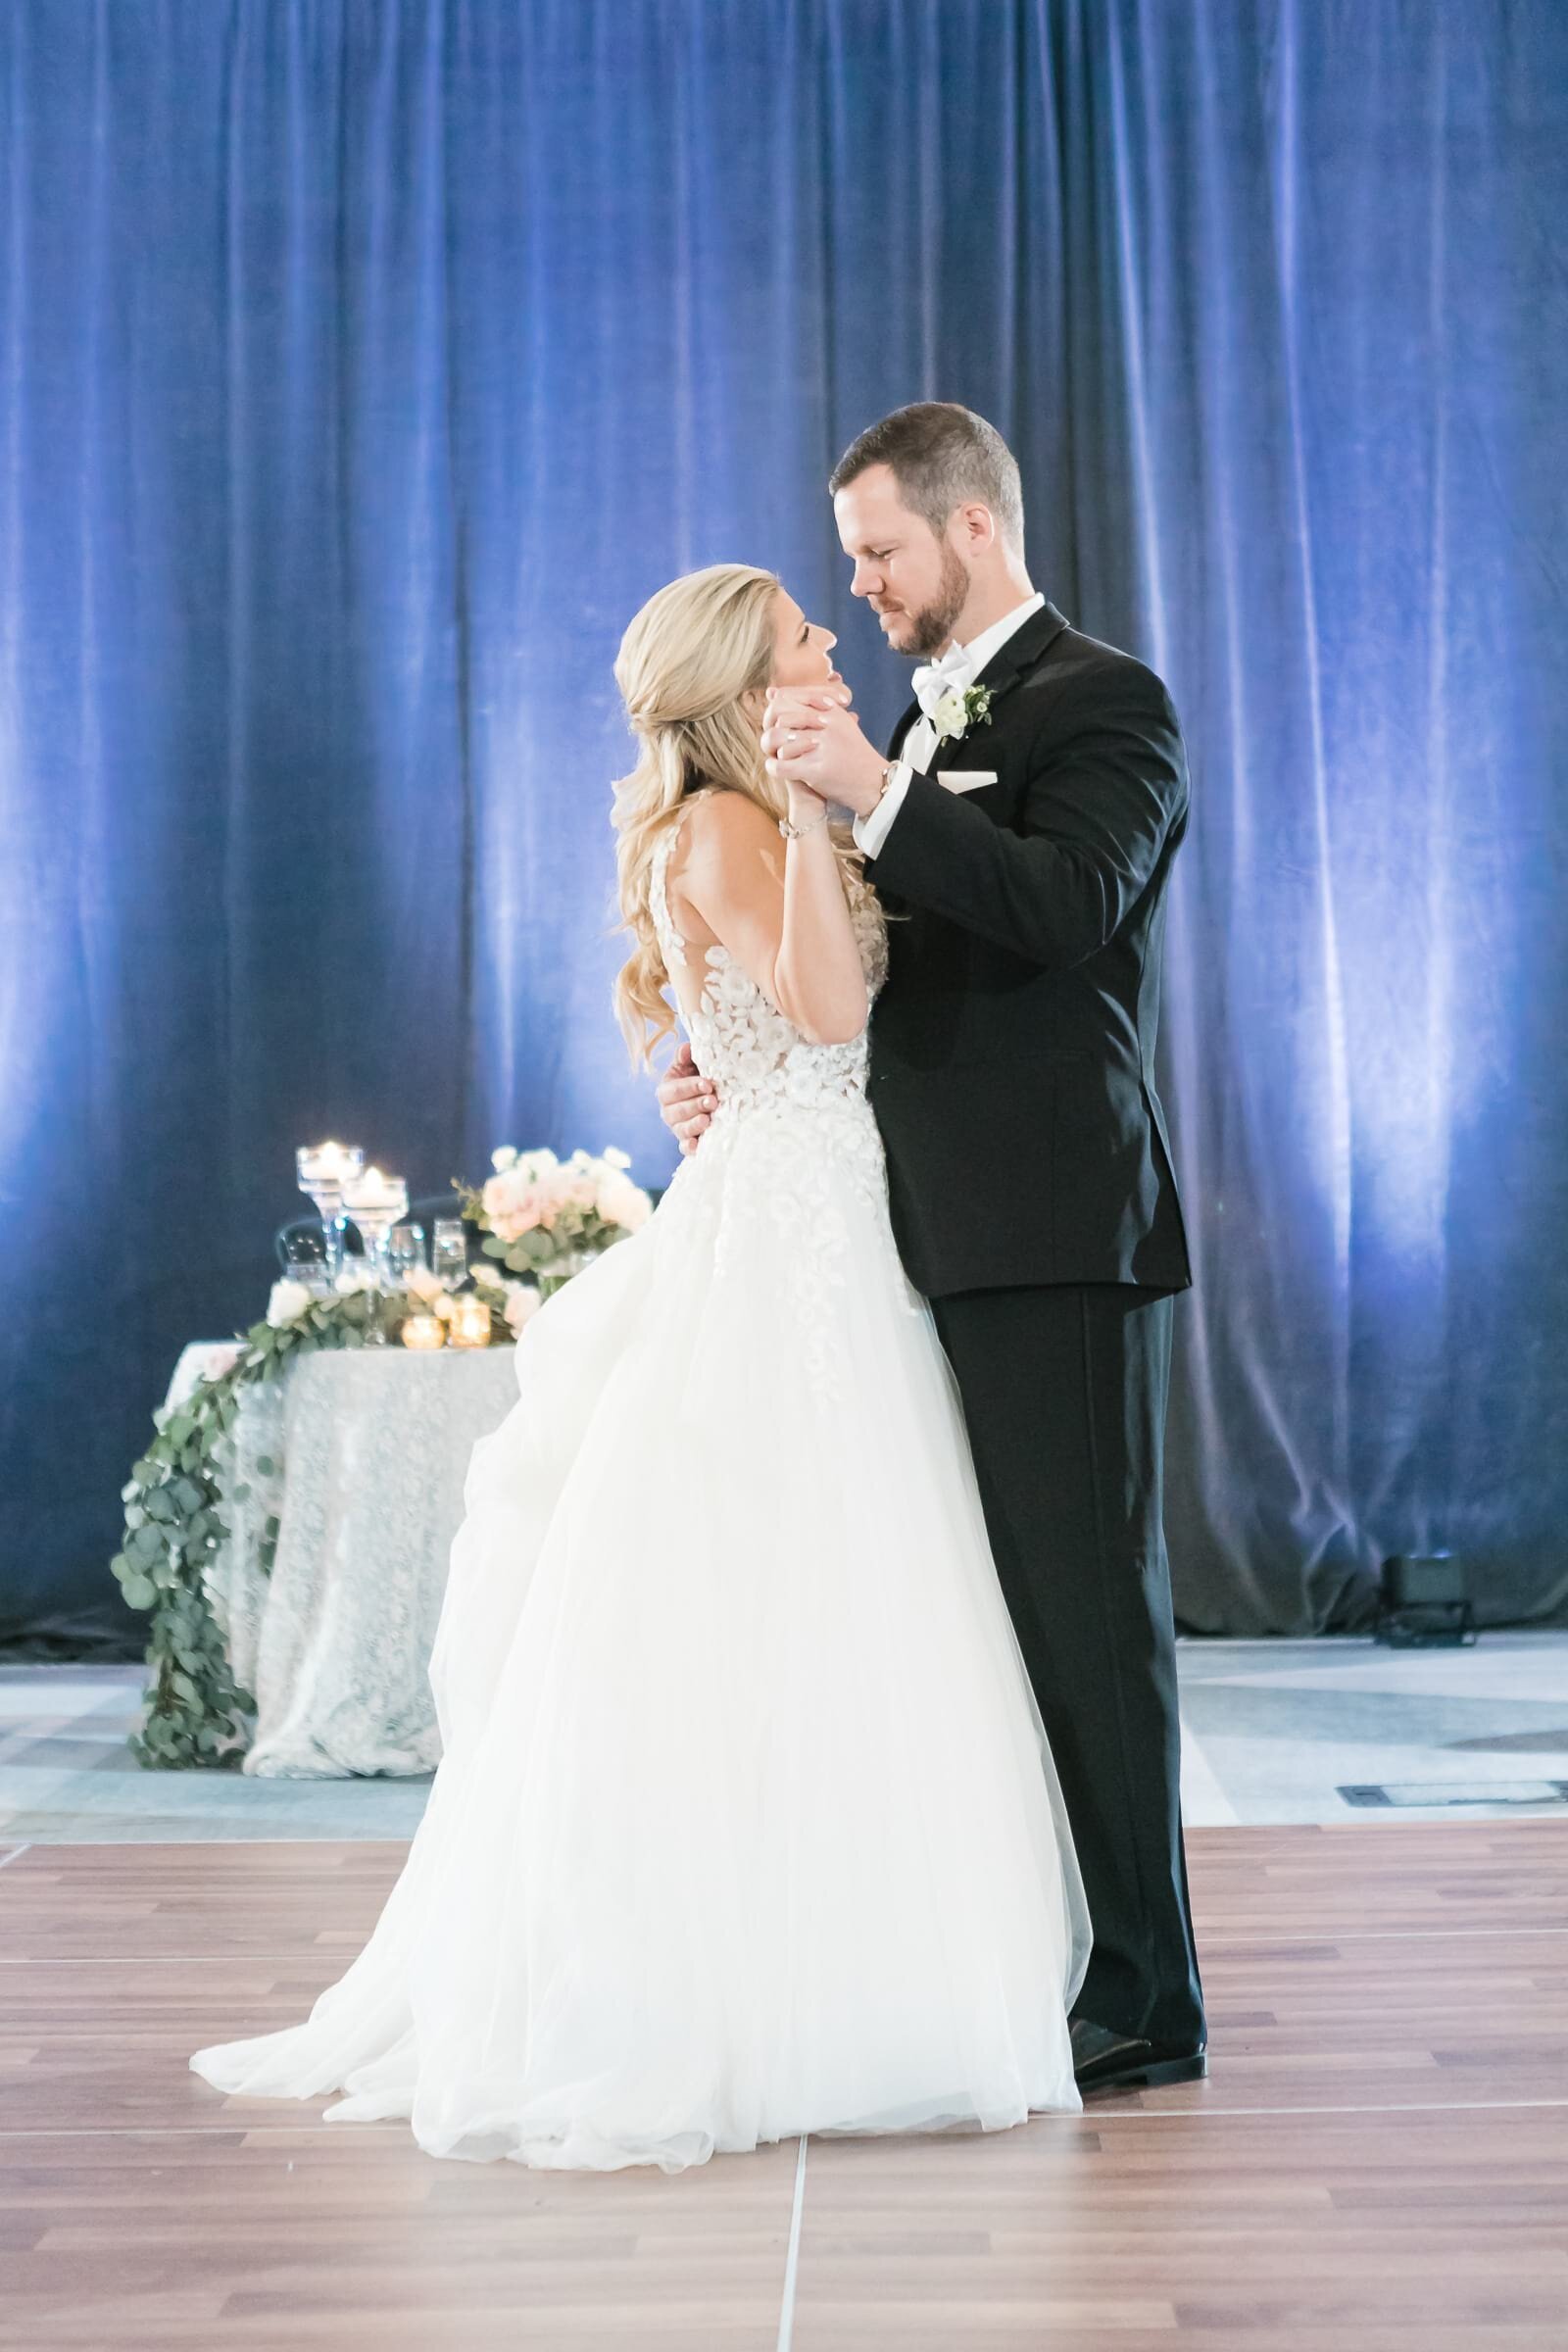 Bride and groom share their first dance at Mountain Shadows Resort.q